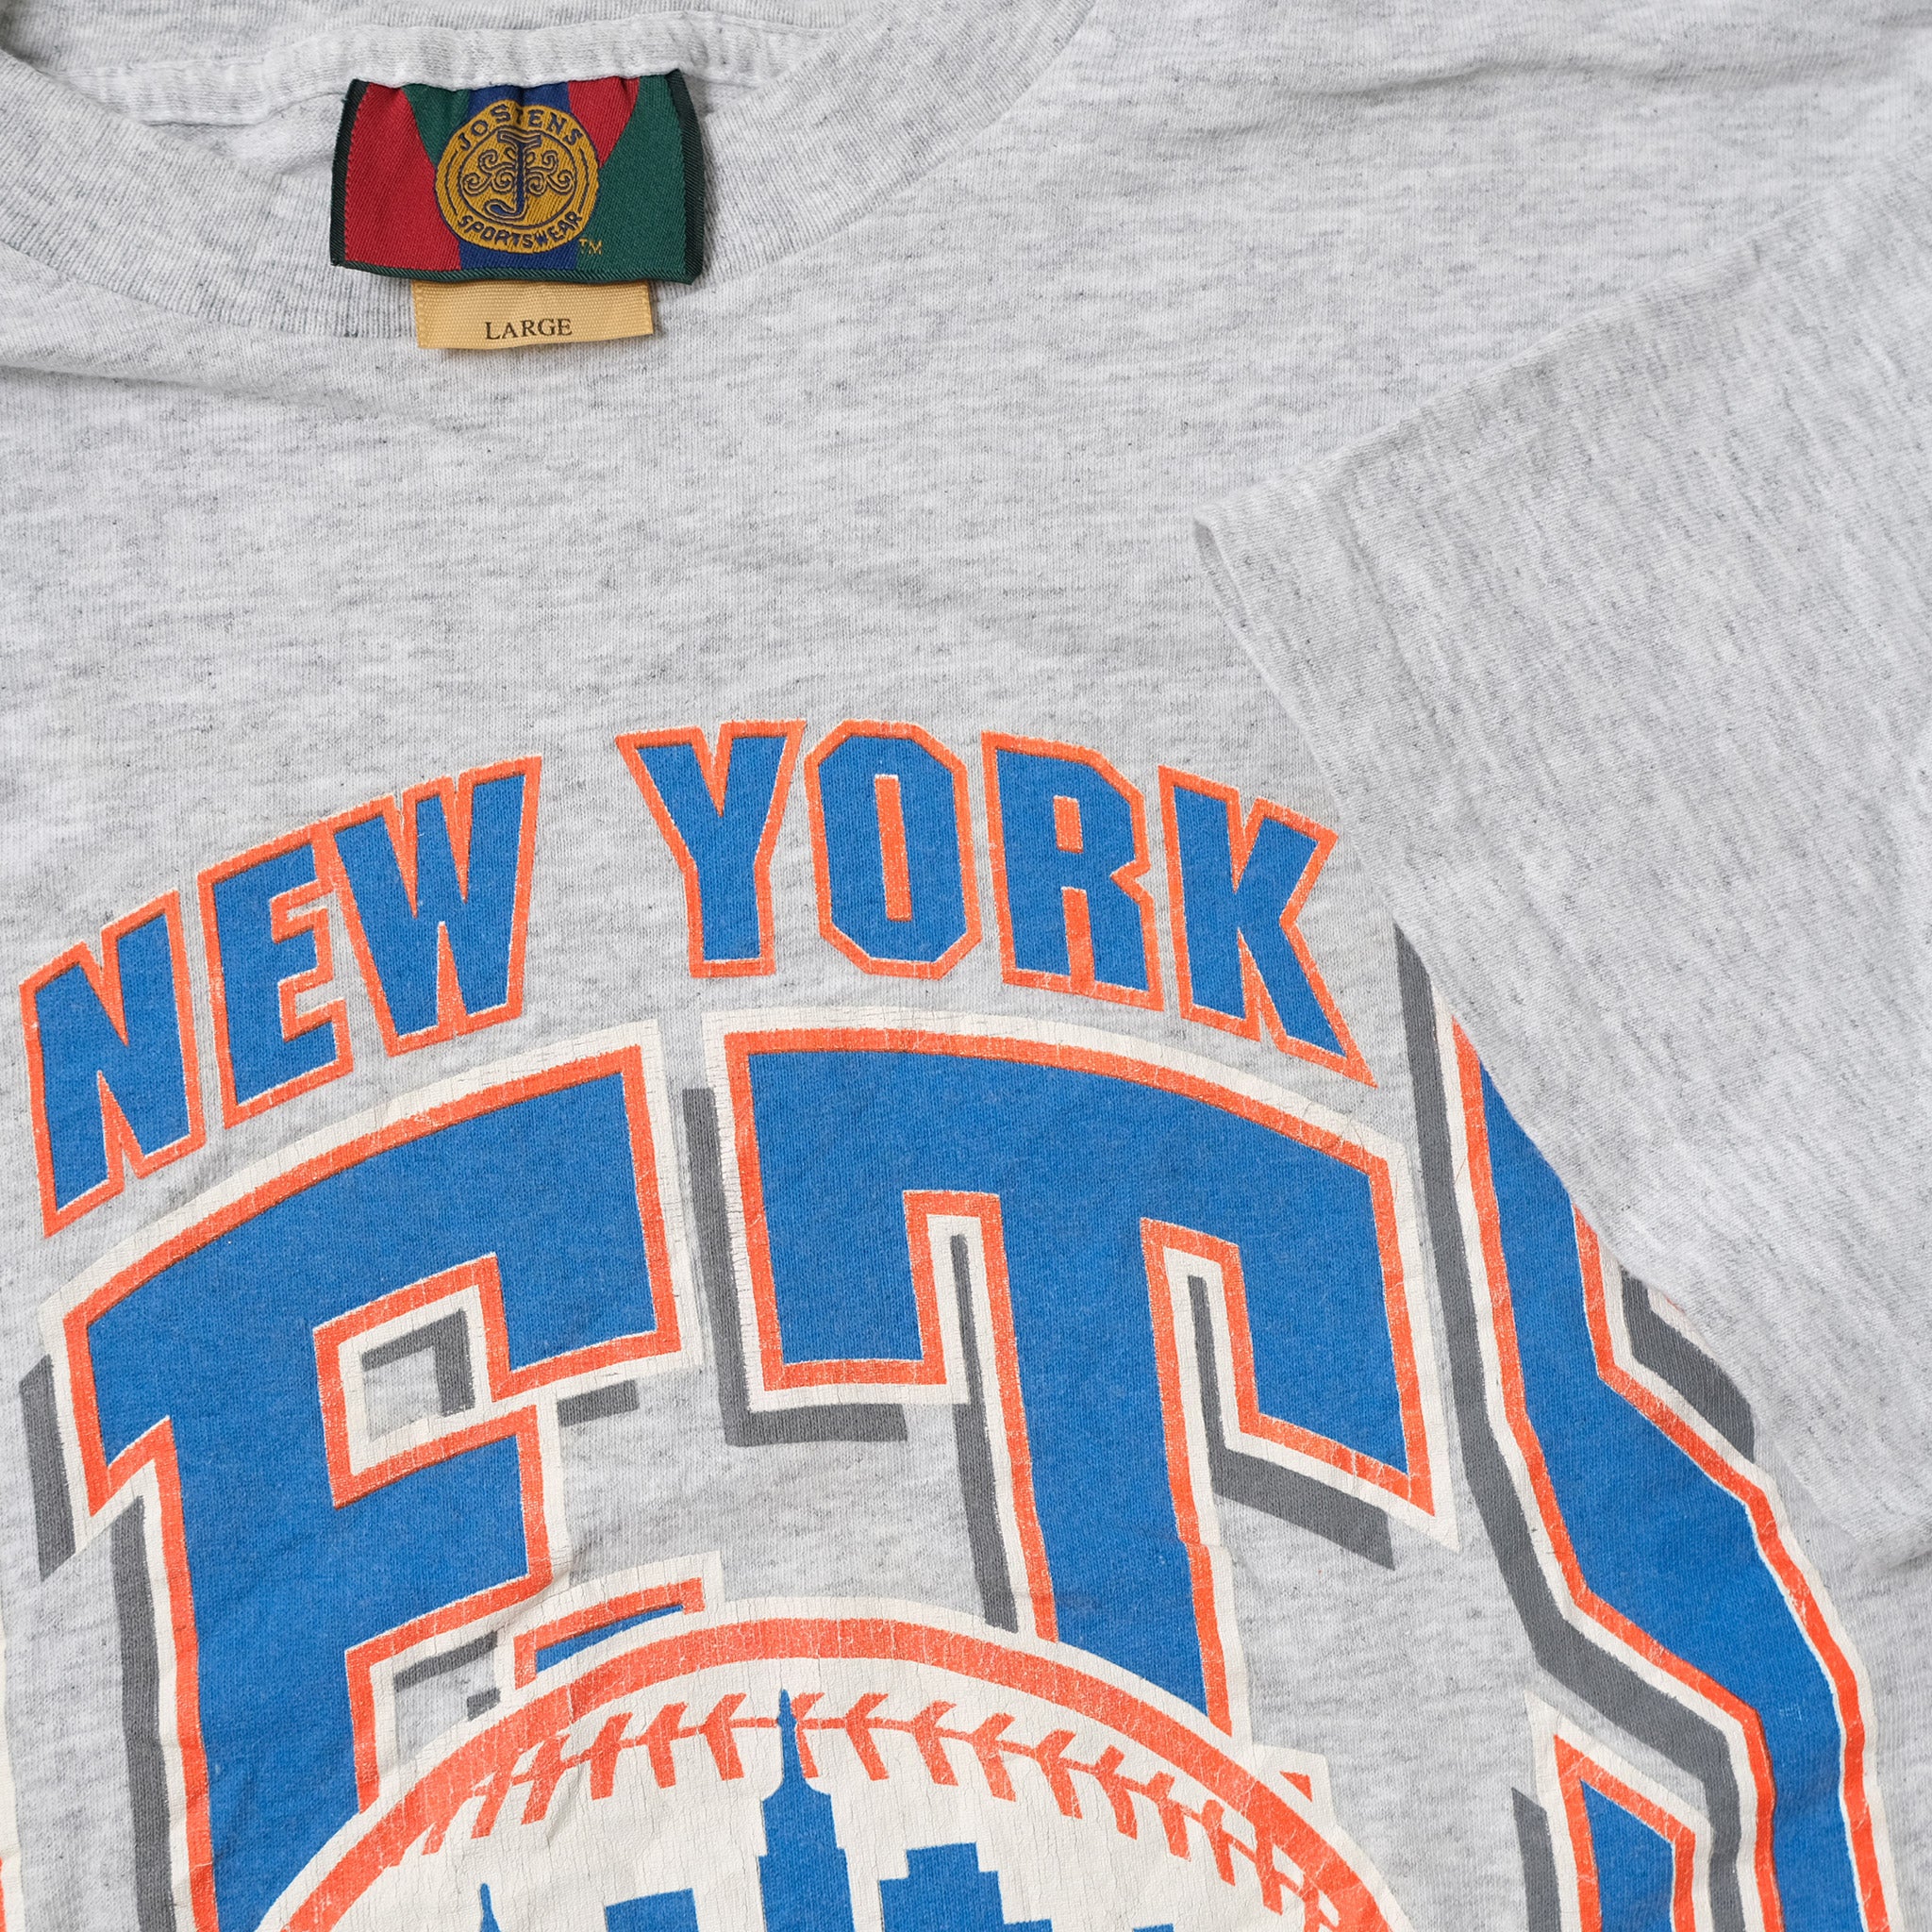 1991 New York Mets Vintage T-Shirt - Fits Like S/M - Trench 50/50